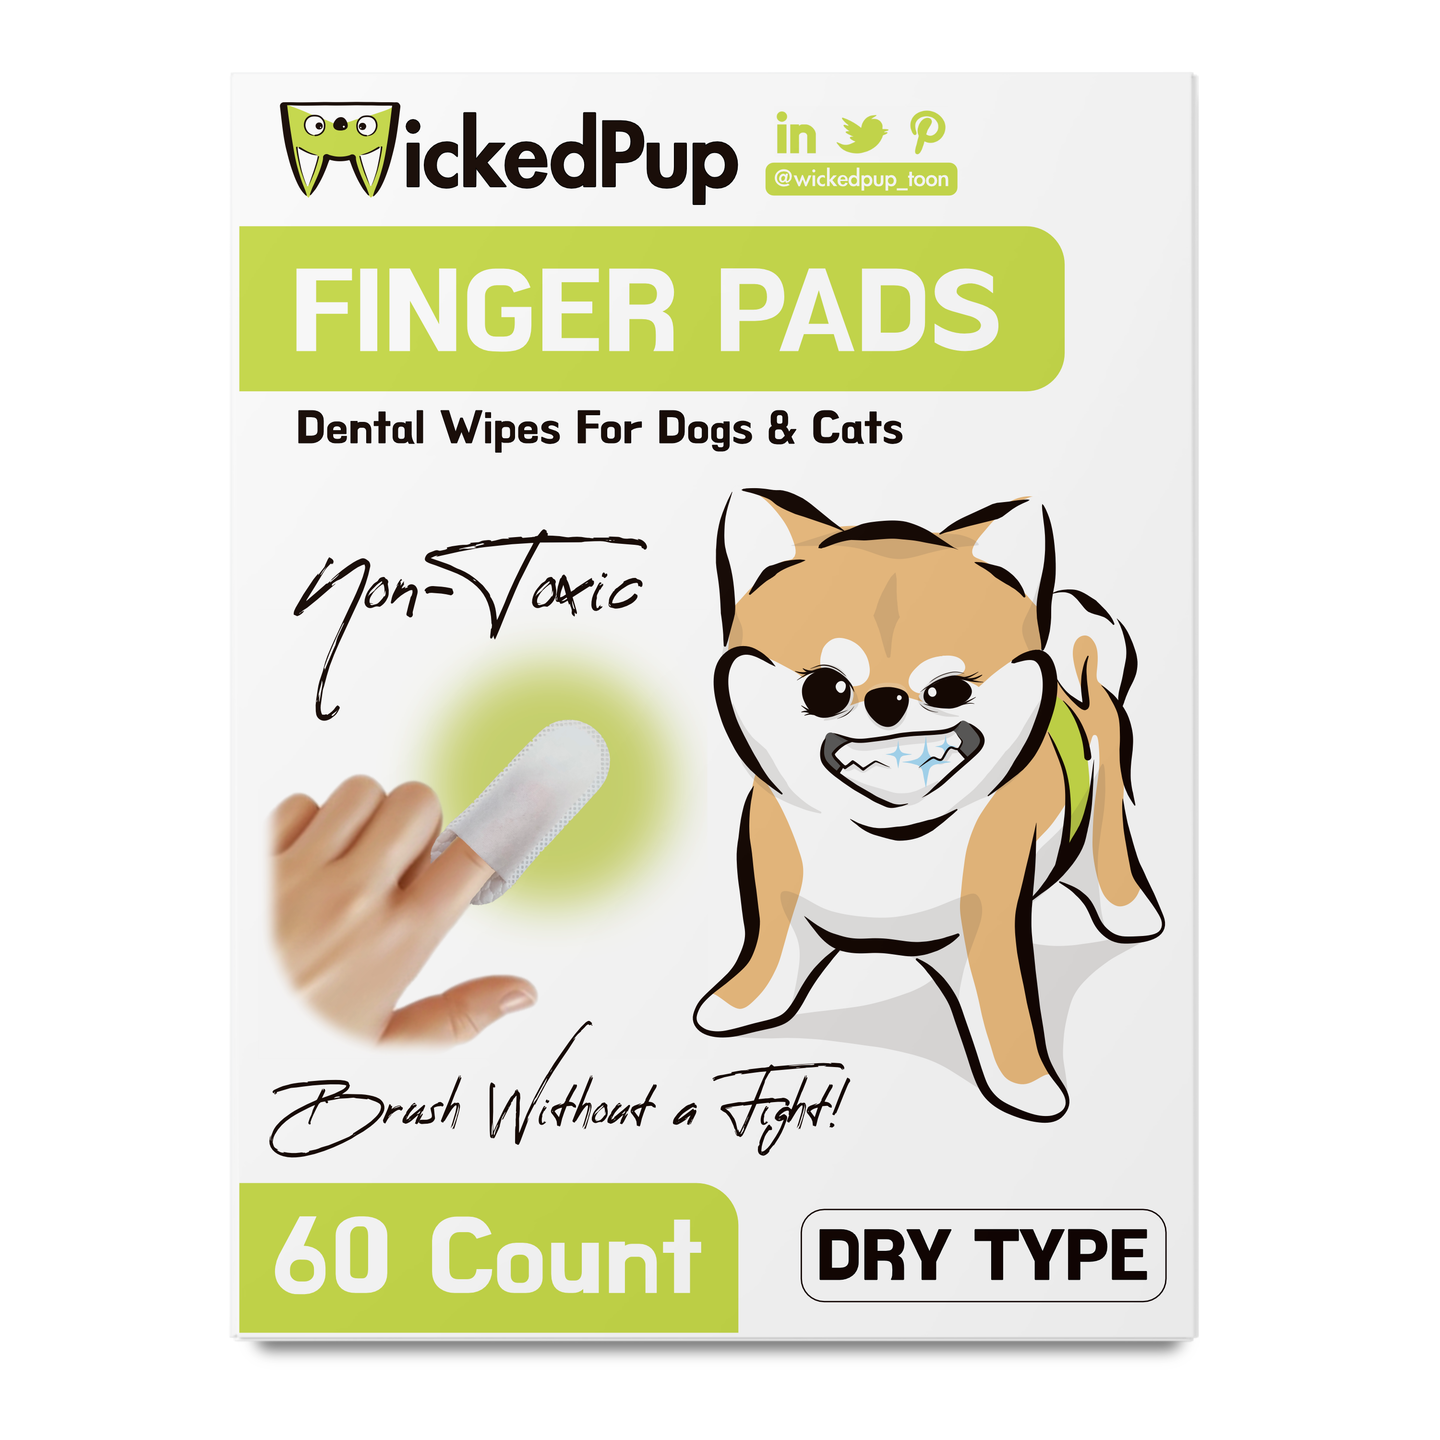 WickedPup Finger Pads for Pet Dental Cleaning, Dry Type, 60 Count